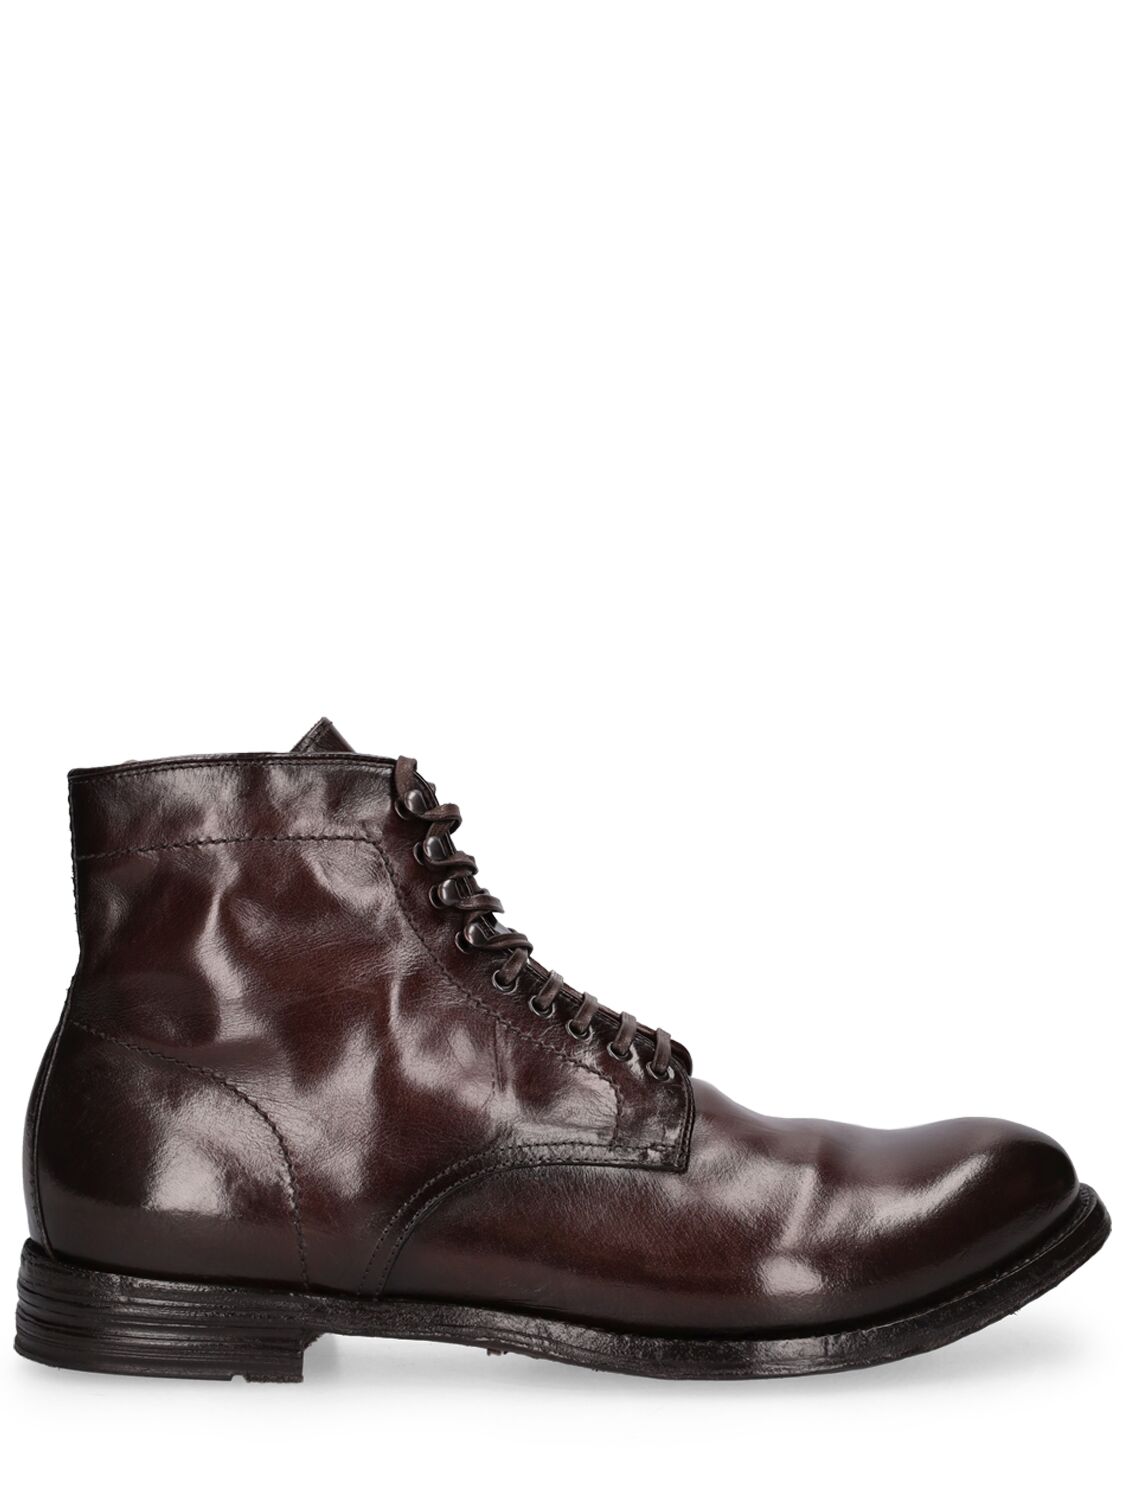 Anatomia Leather Lace-up Boots – MEN > SHOES > BOOTS